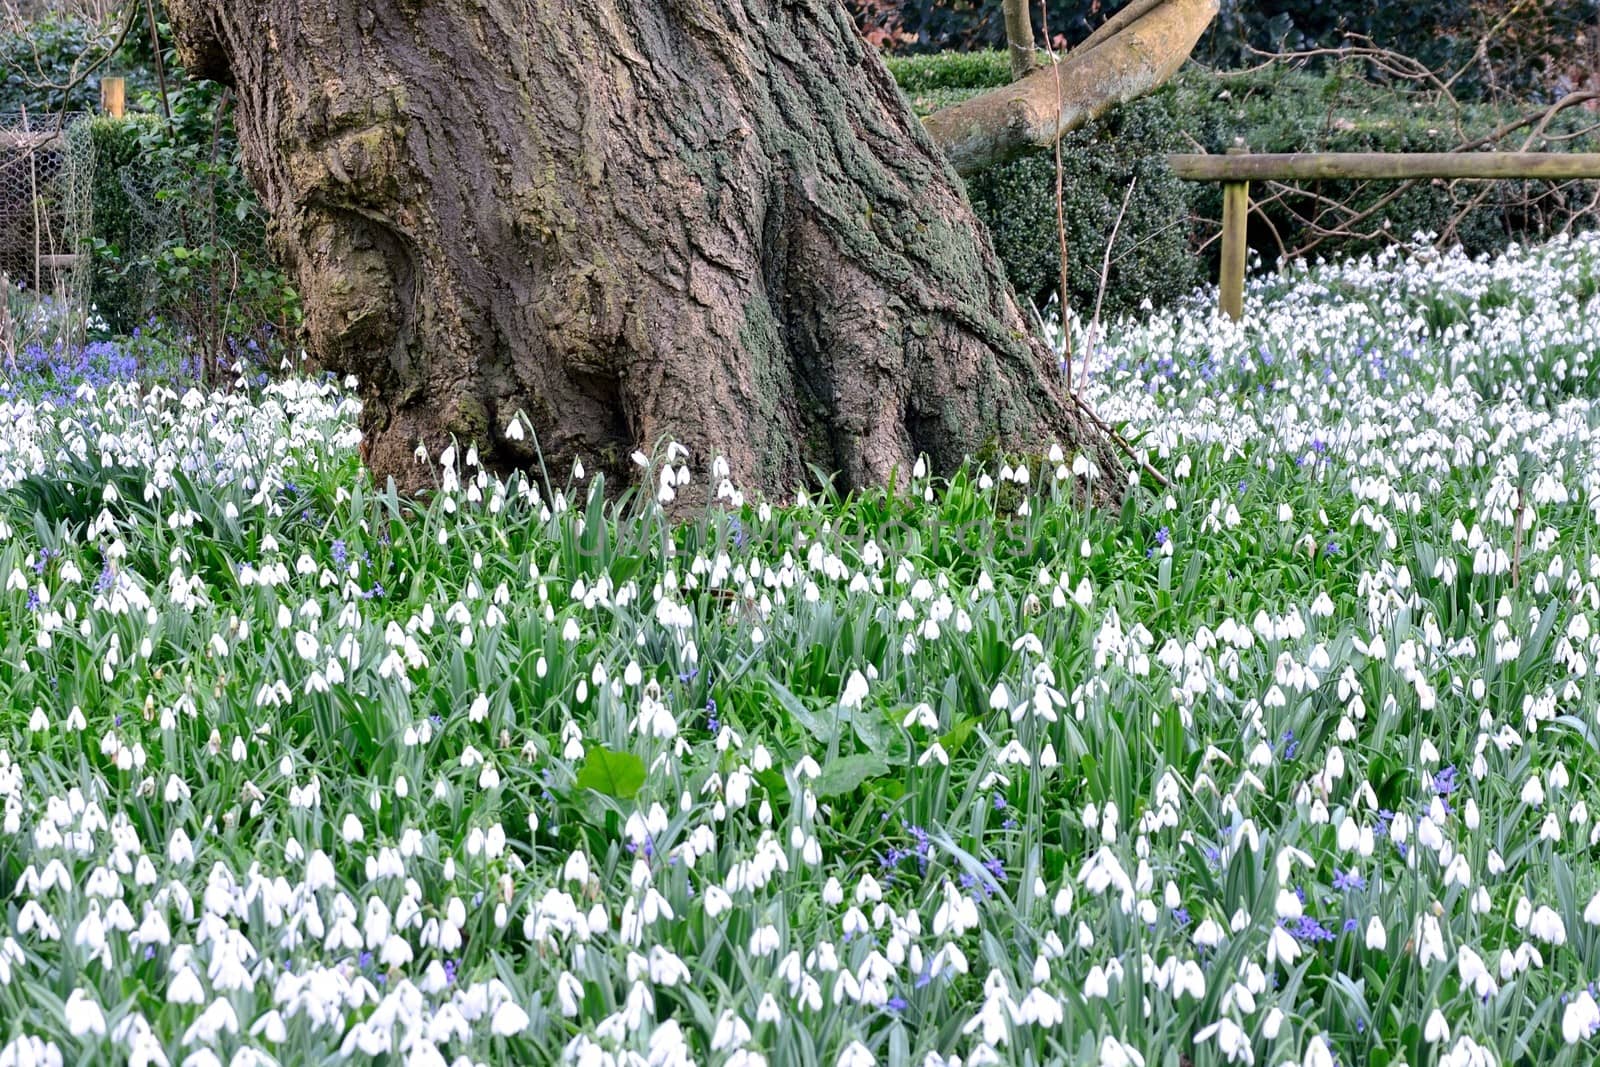 Snowdrops by treetrunk by pauws99